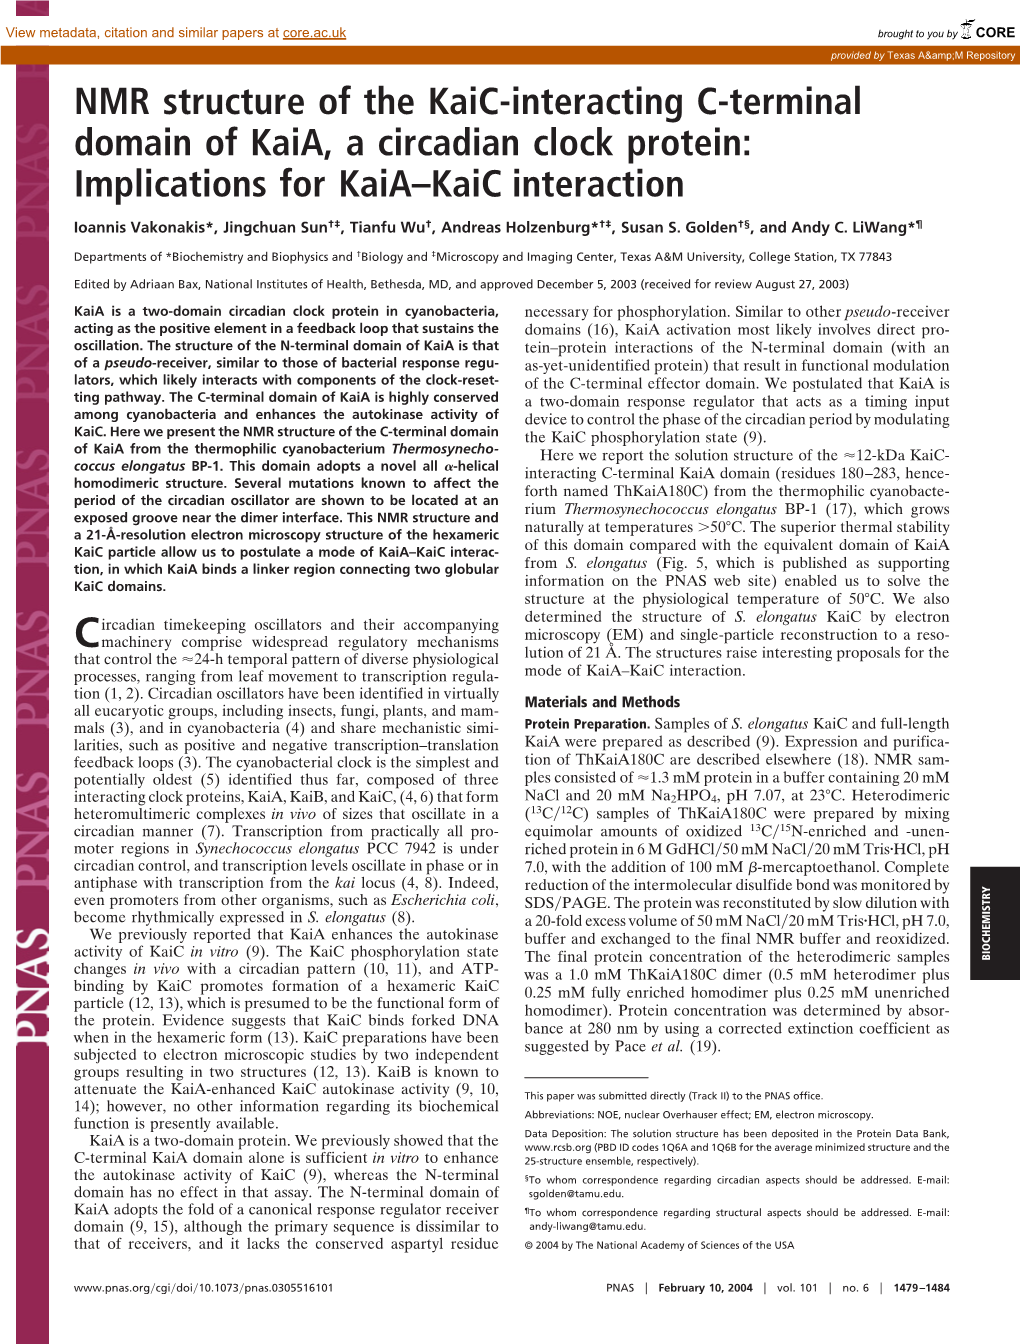 NMR Structure of the Kaic-Interacting C-Terminal Domain of Kaia, a Circadian Clock Protein: Implications for Kaia–Kaic Interaction